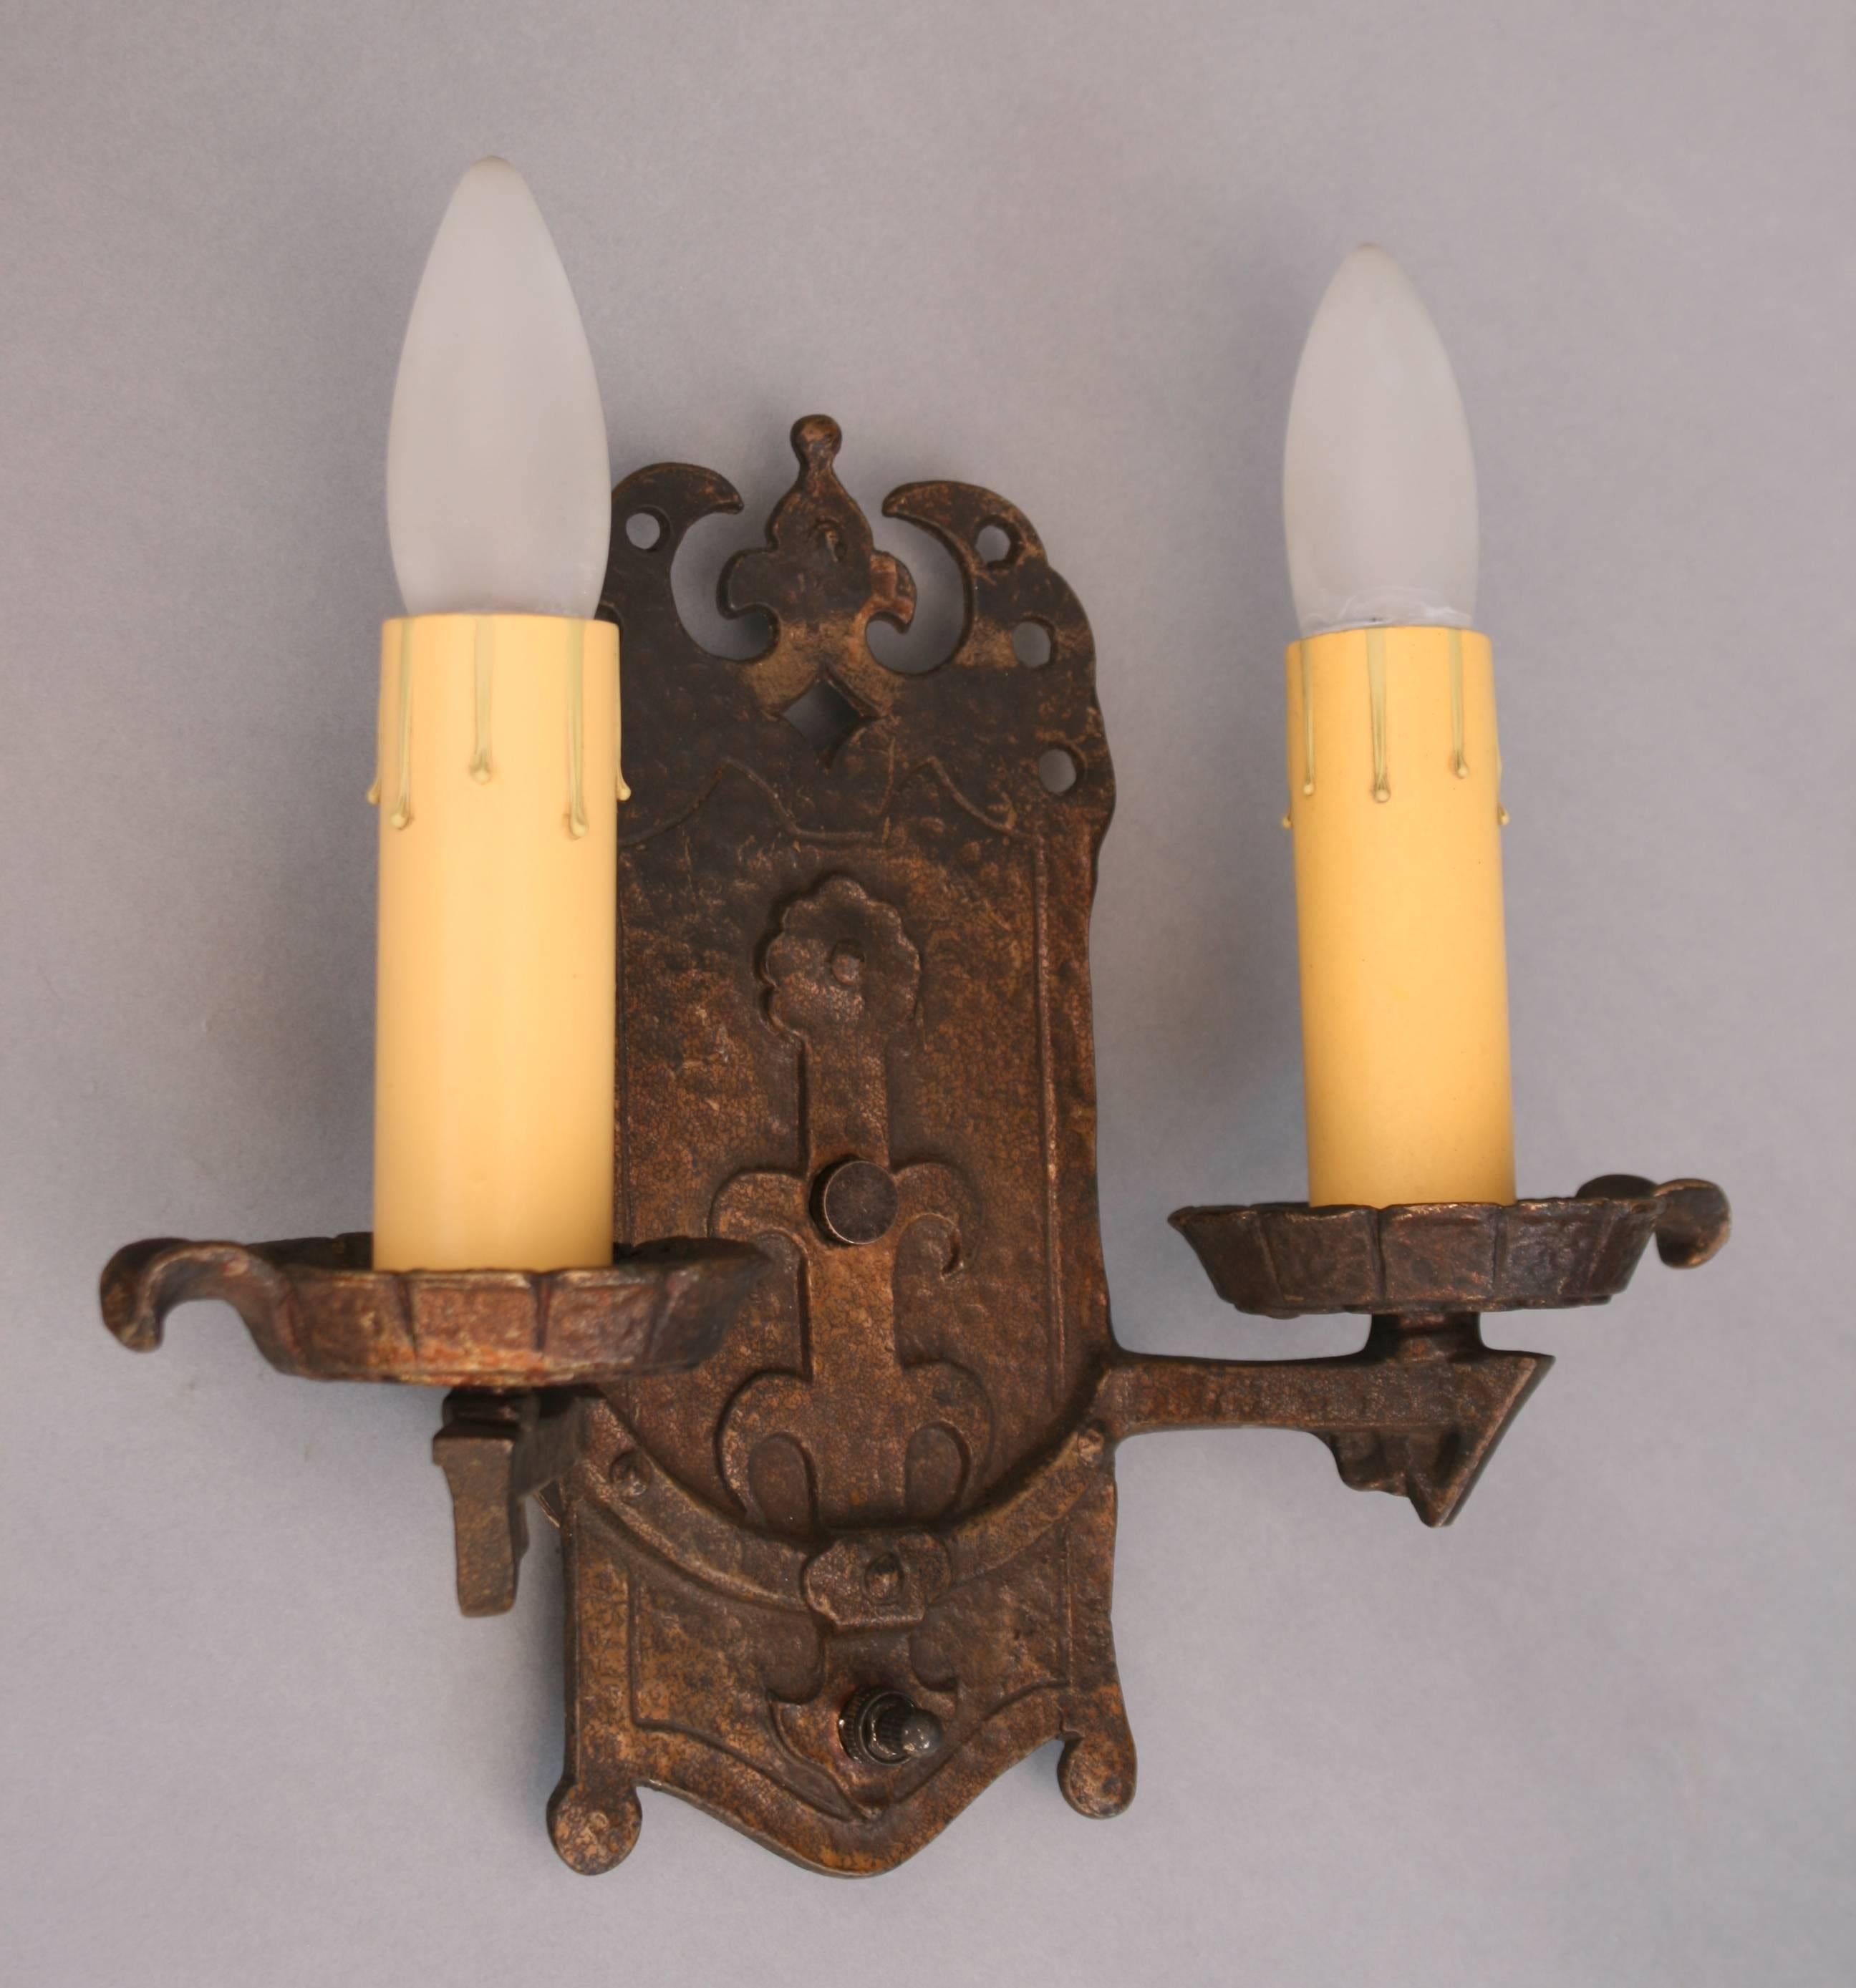 Spanish Colonial 1920s Spanish Revival Sconce